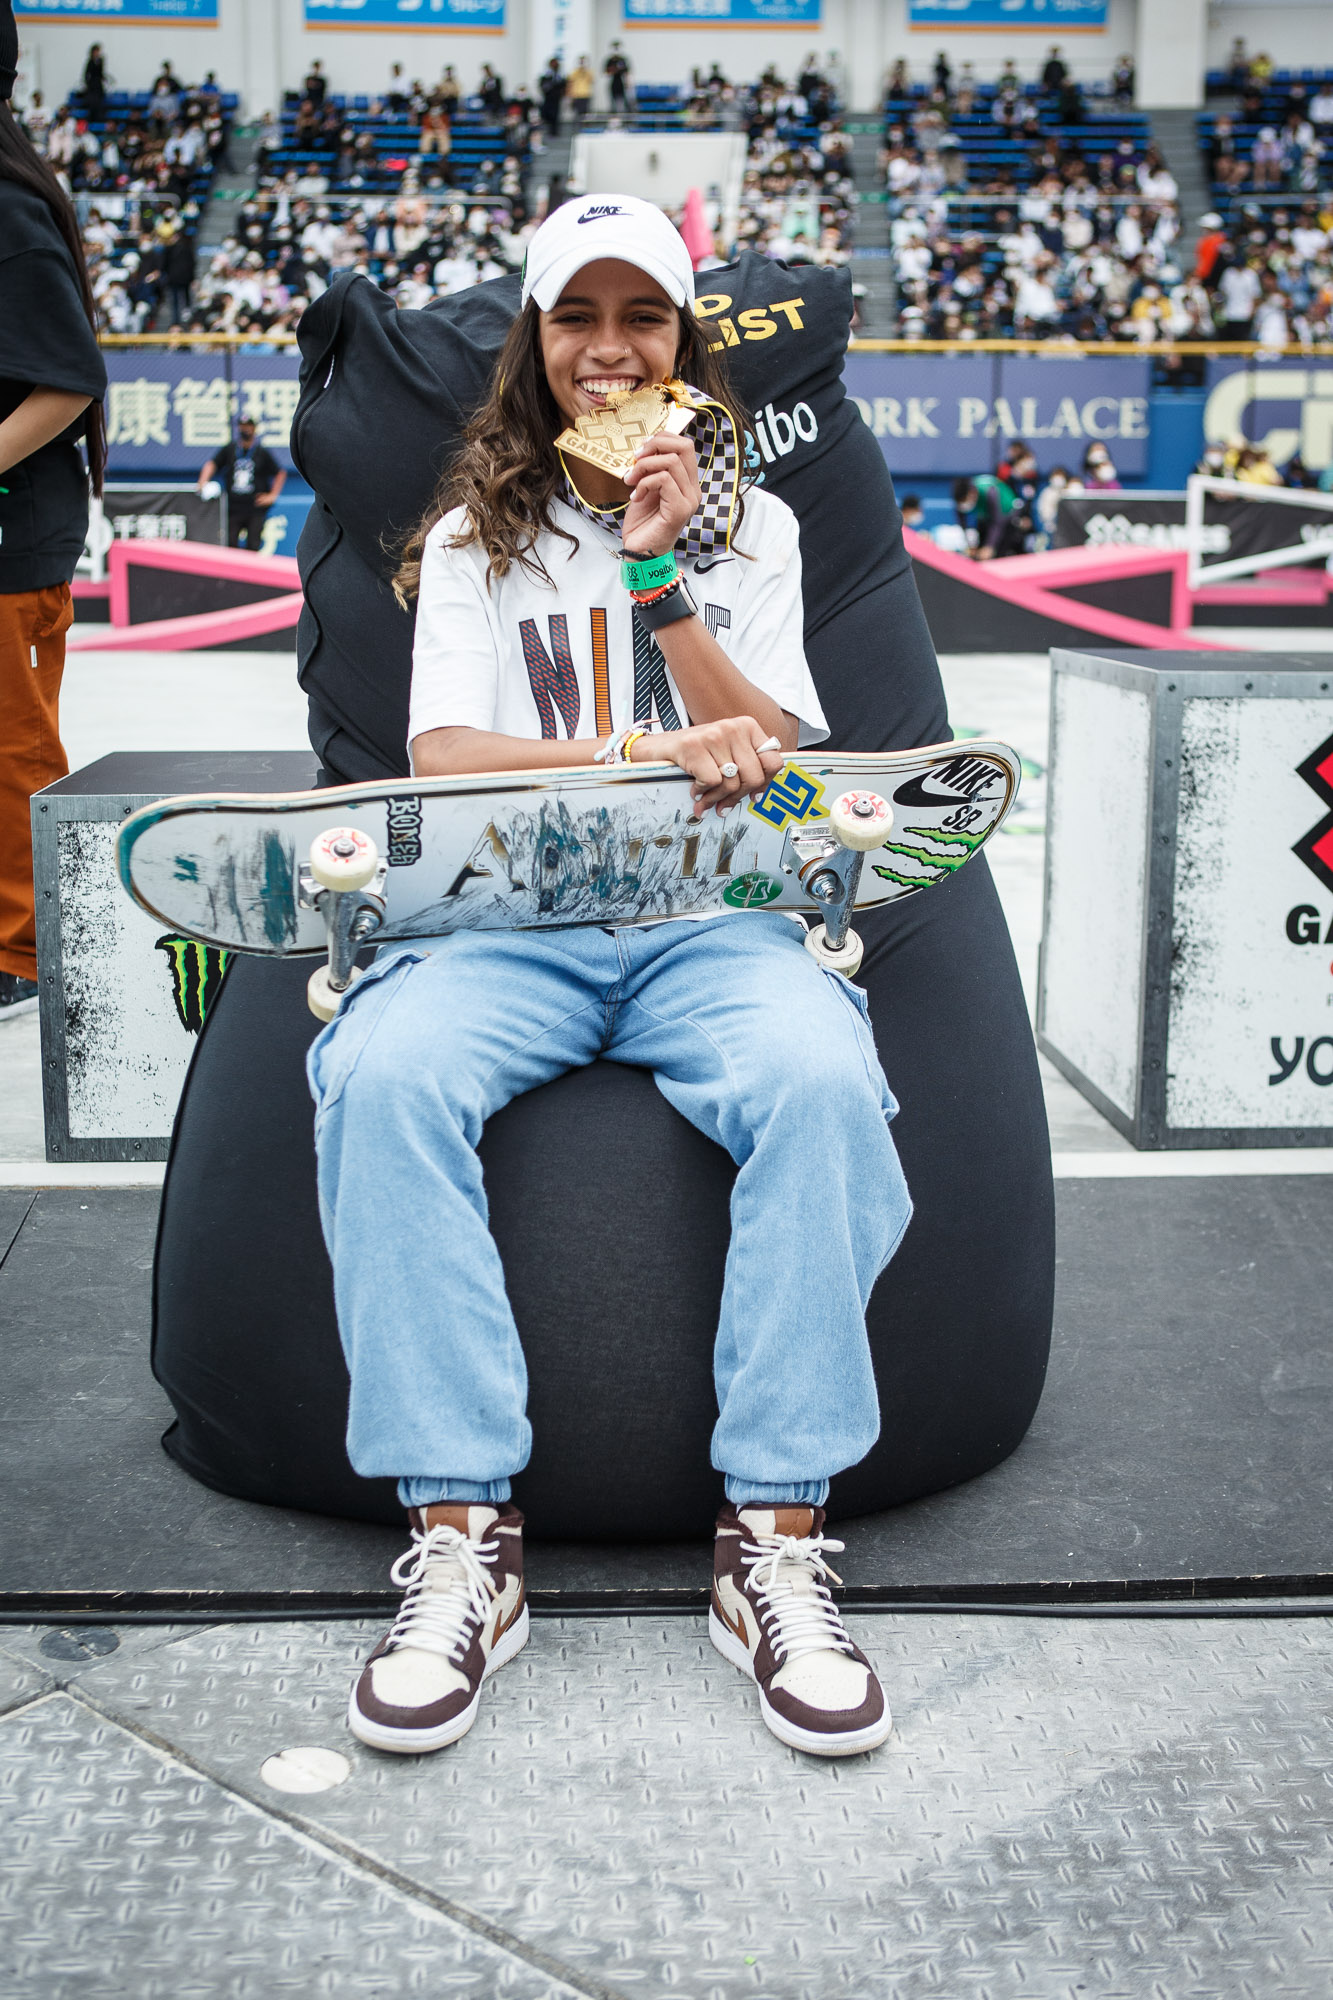 Monster Energy's Rayssa Leal Will Compete in Women's Skateboard Street at X Games Chiba 2023